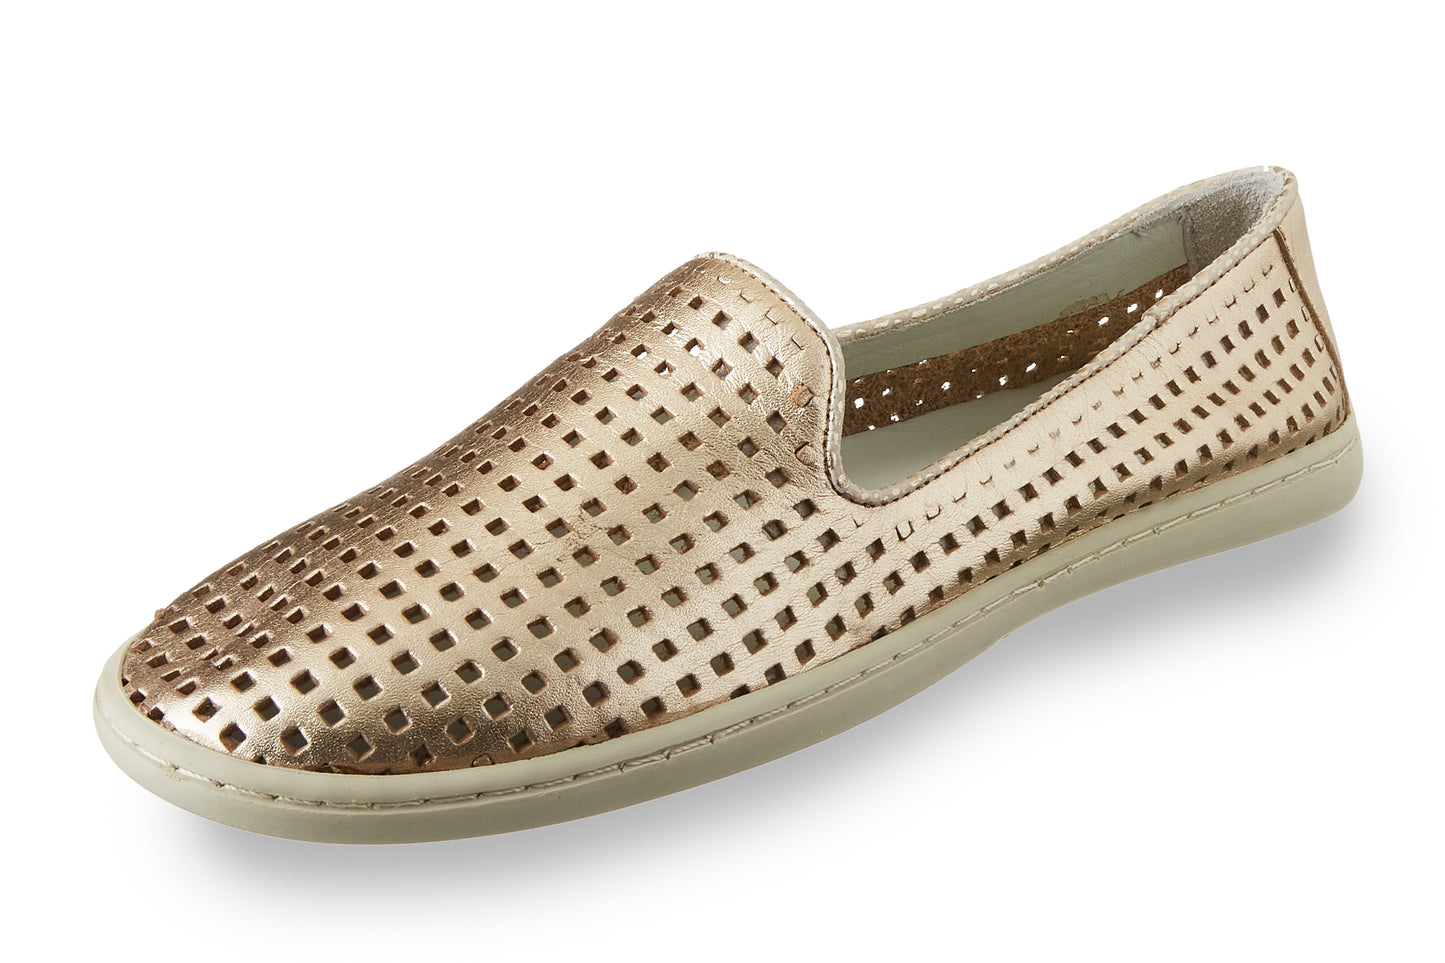 Chocolat Blu Move Brenn - Perforated Slip-On Loafer Shoe in Genuine Leather